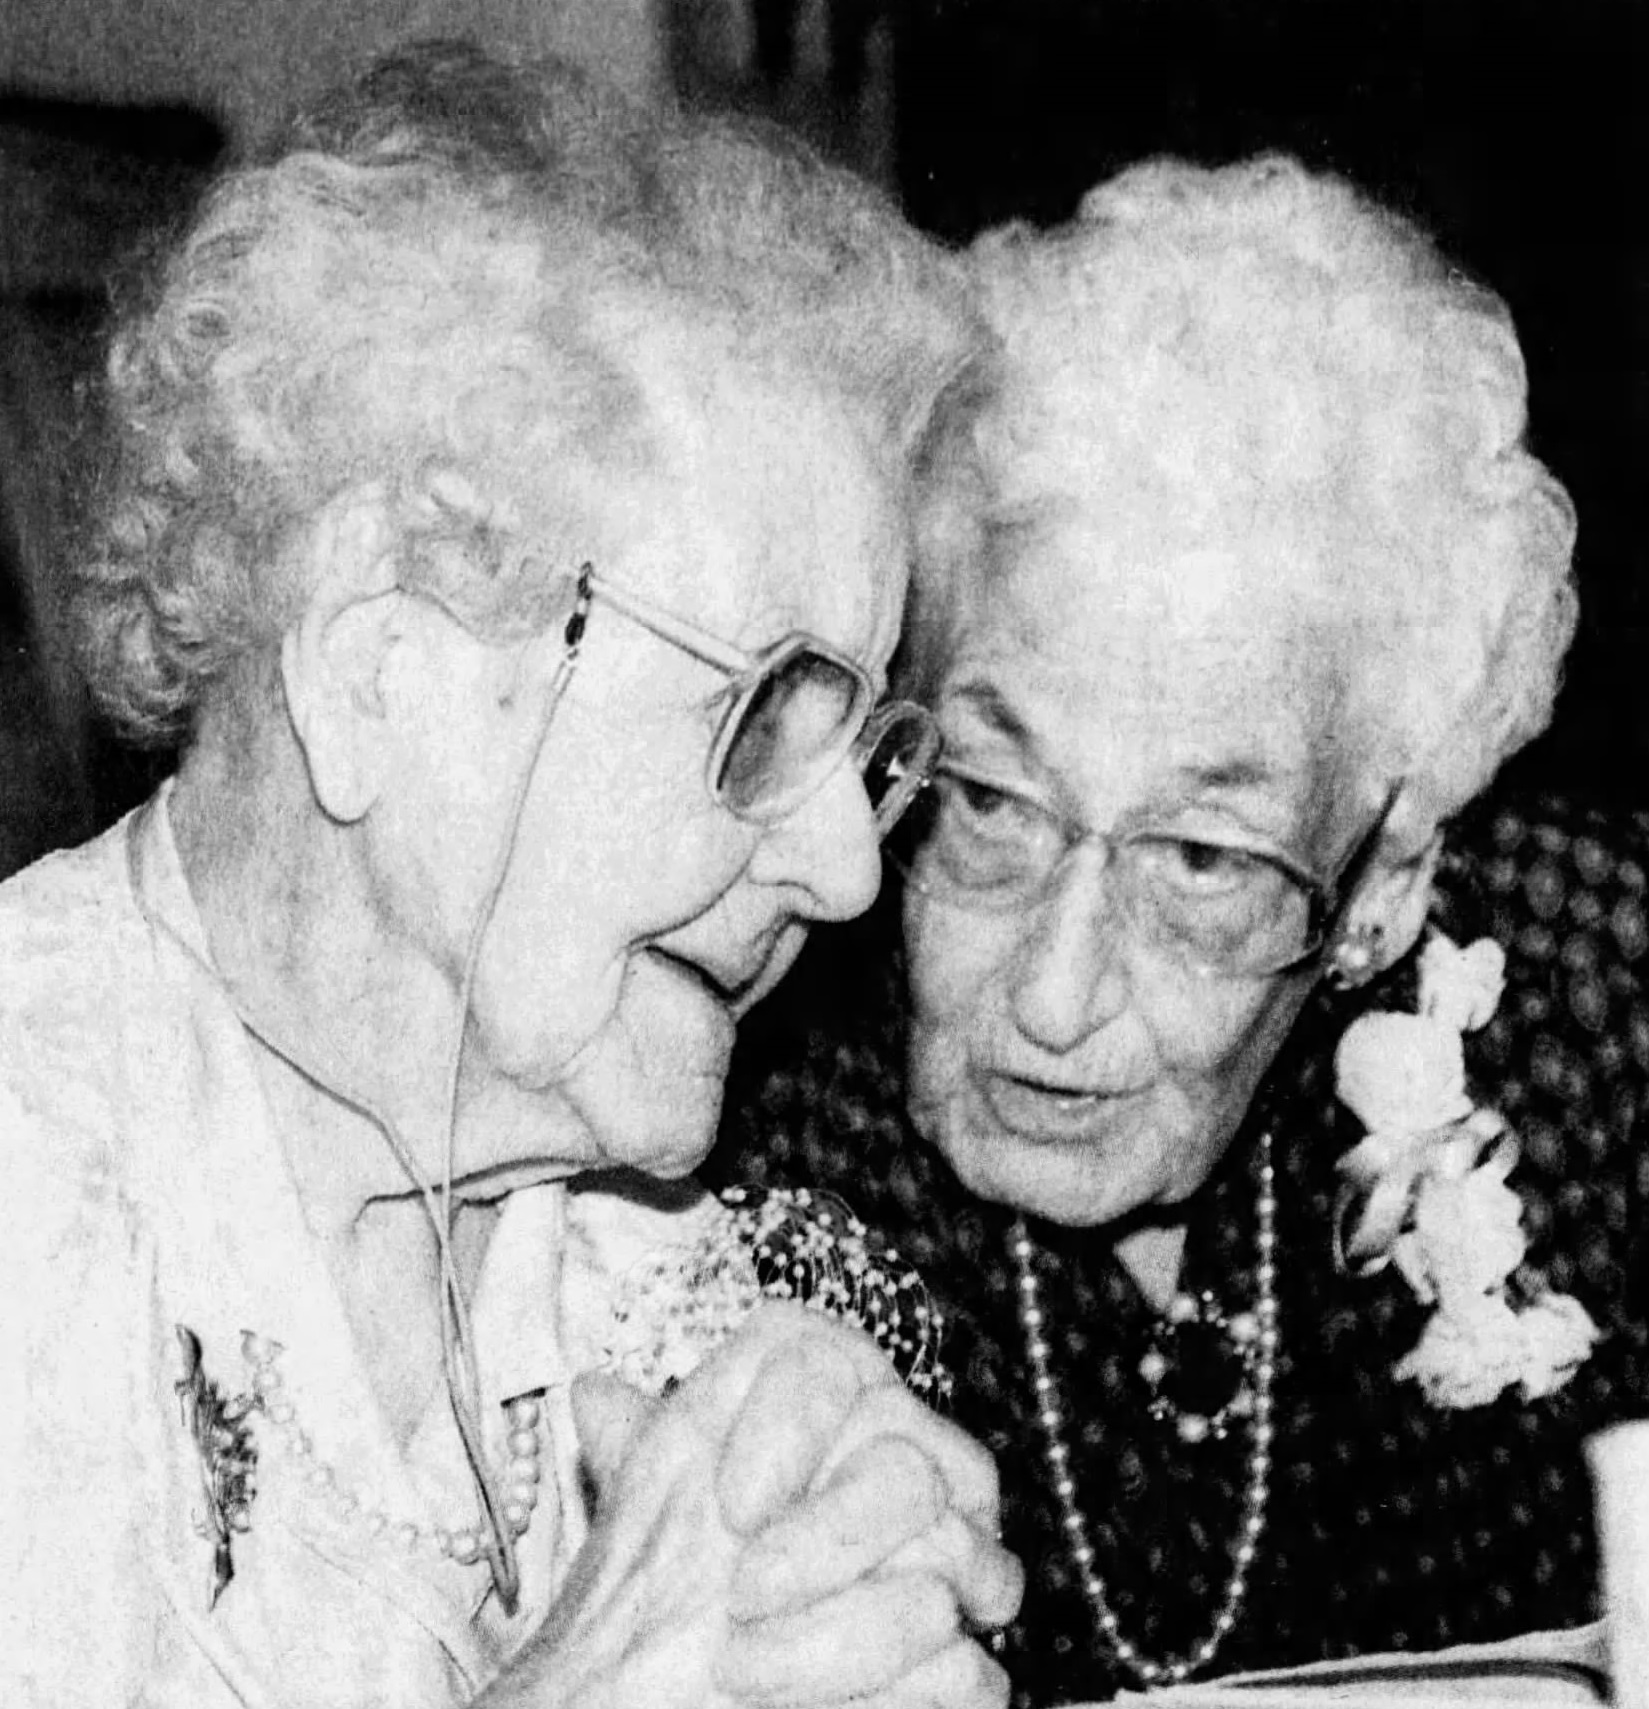 Pease (left) on her 108th birthday in 1996, alongside another centenarian, Freda McLaughlin (who was about to turn 101 at the time). (Source: The Ottawa Citizen,10 May 1996)